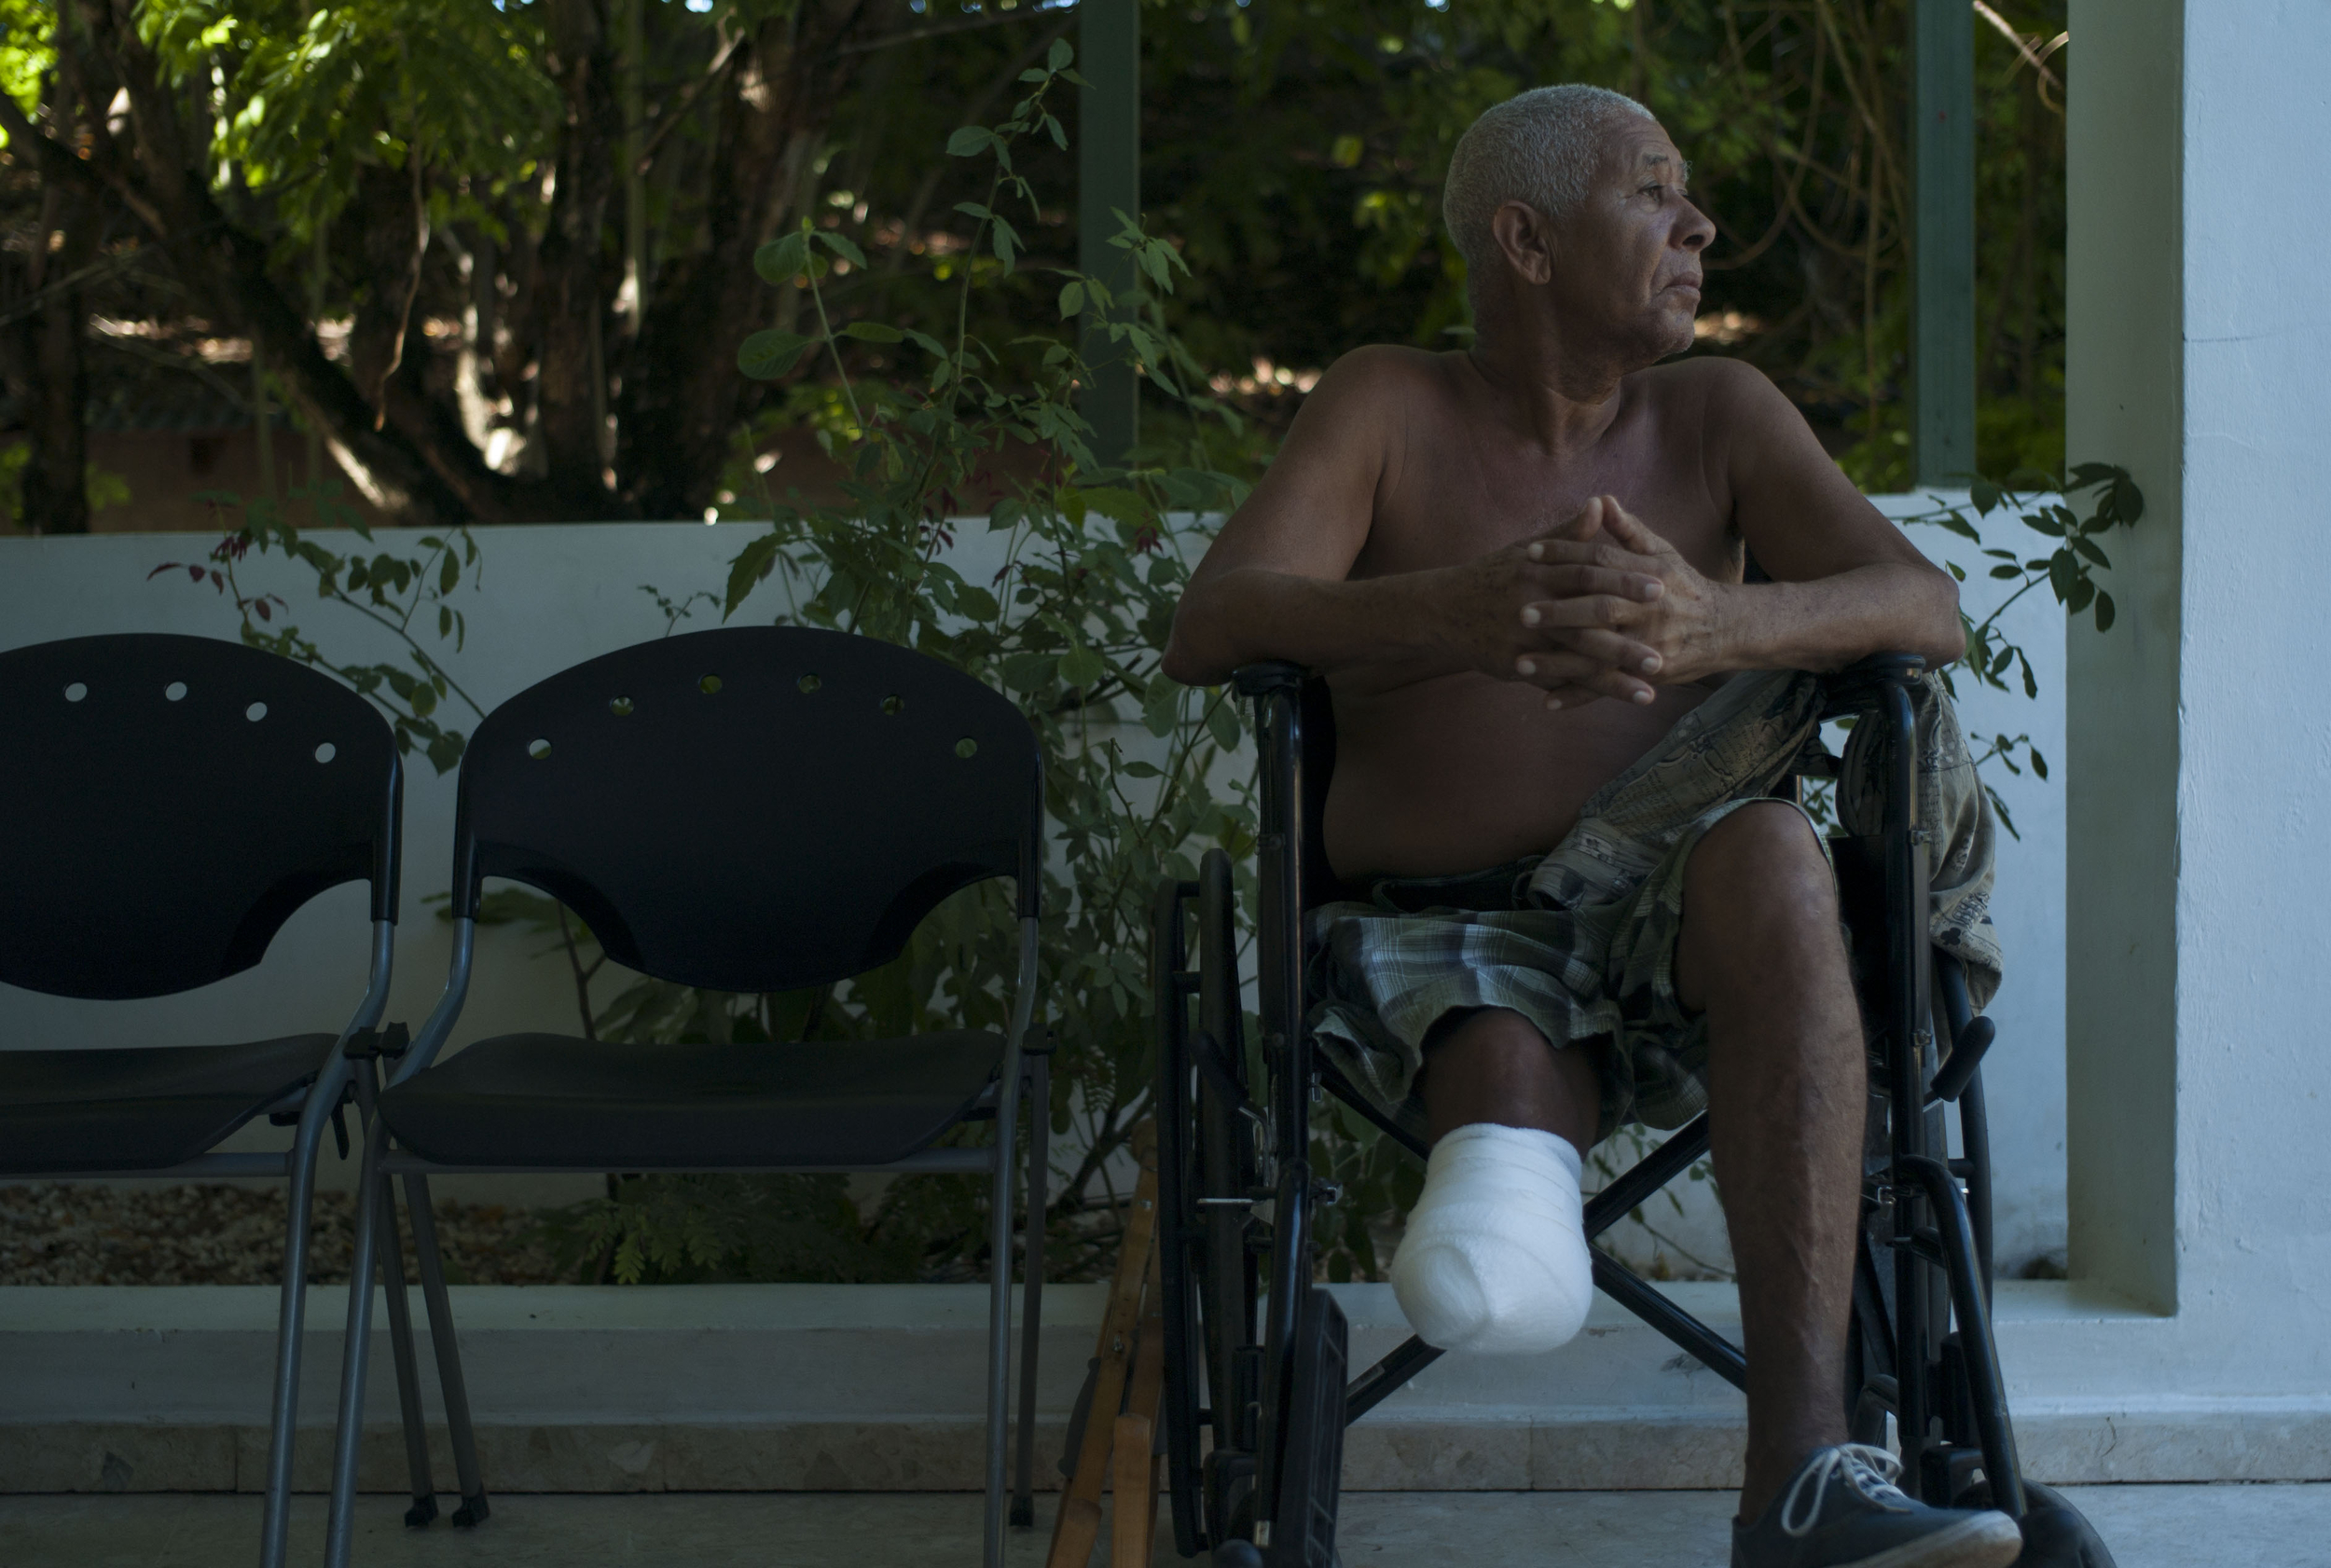  A diabetic amputee waits for his appointment,&nbsp; Paraiso, Dominican Republic.  